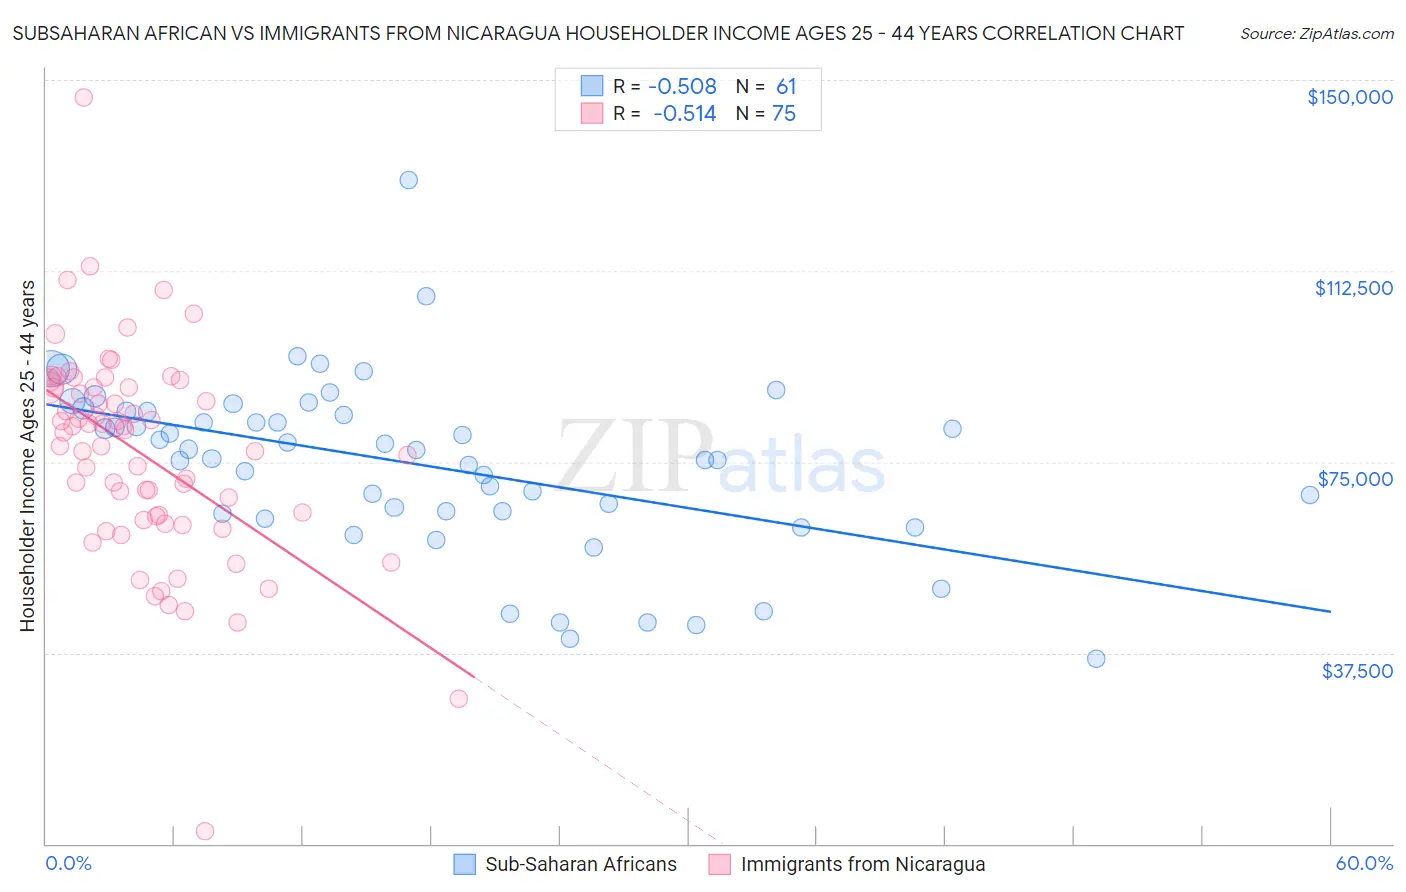 Subsaharan African vs Immigrants from Nicaragua Householder Income Ages 25 - 44 years